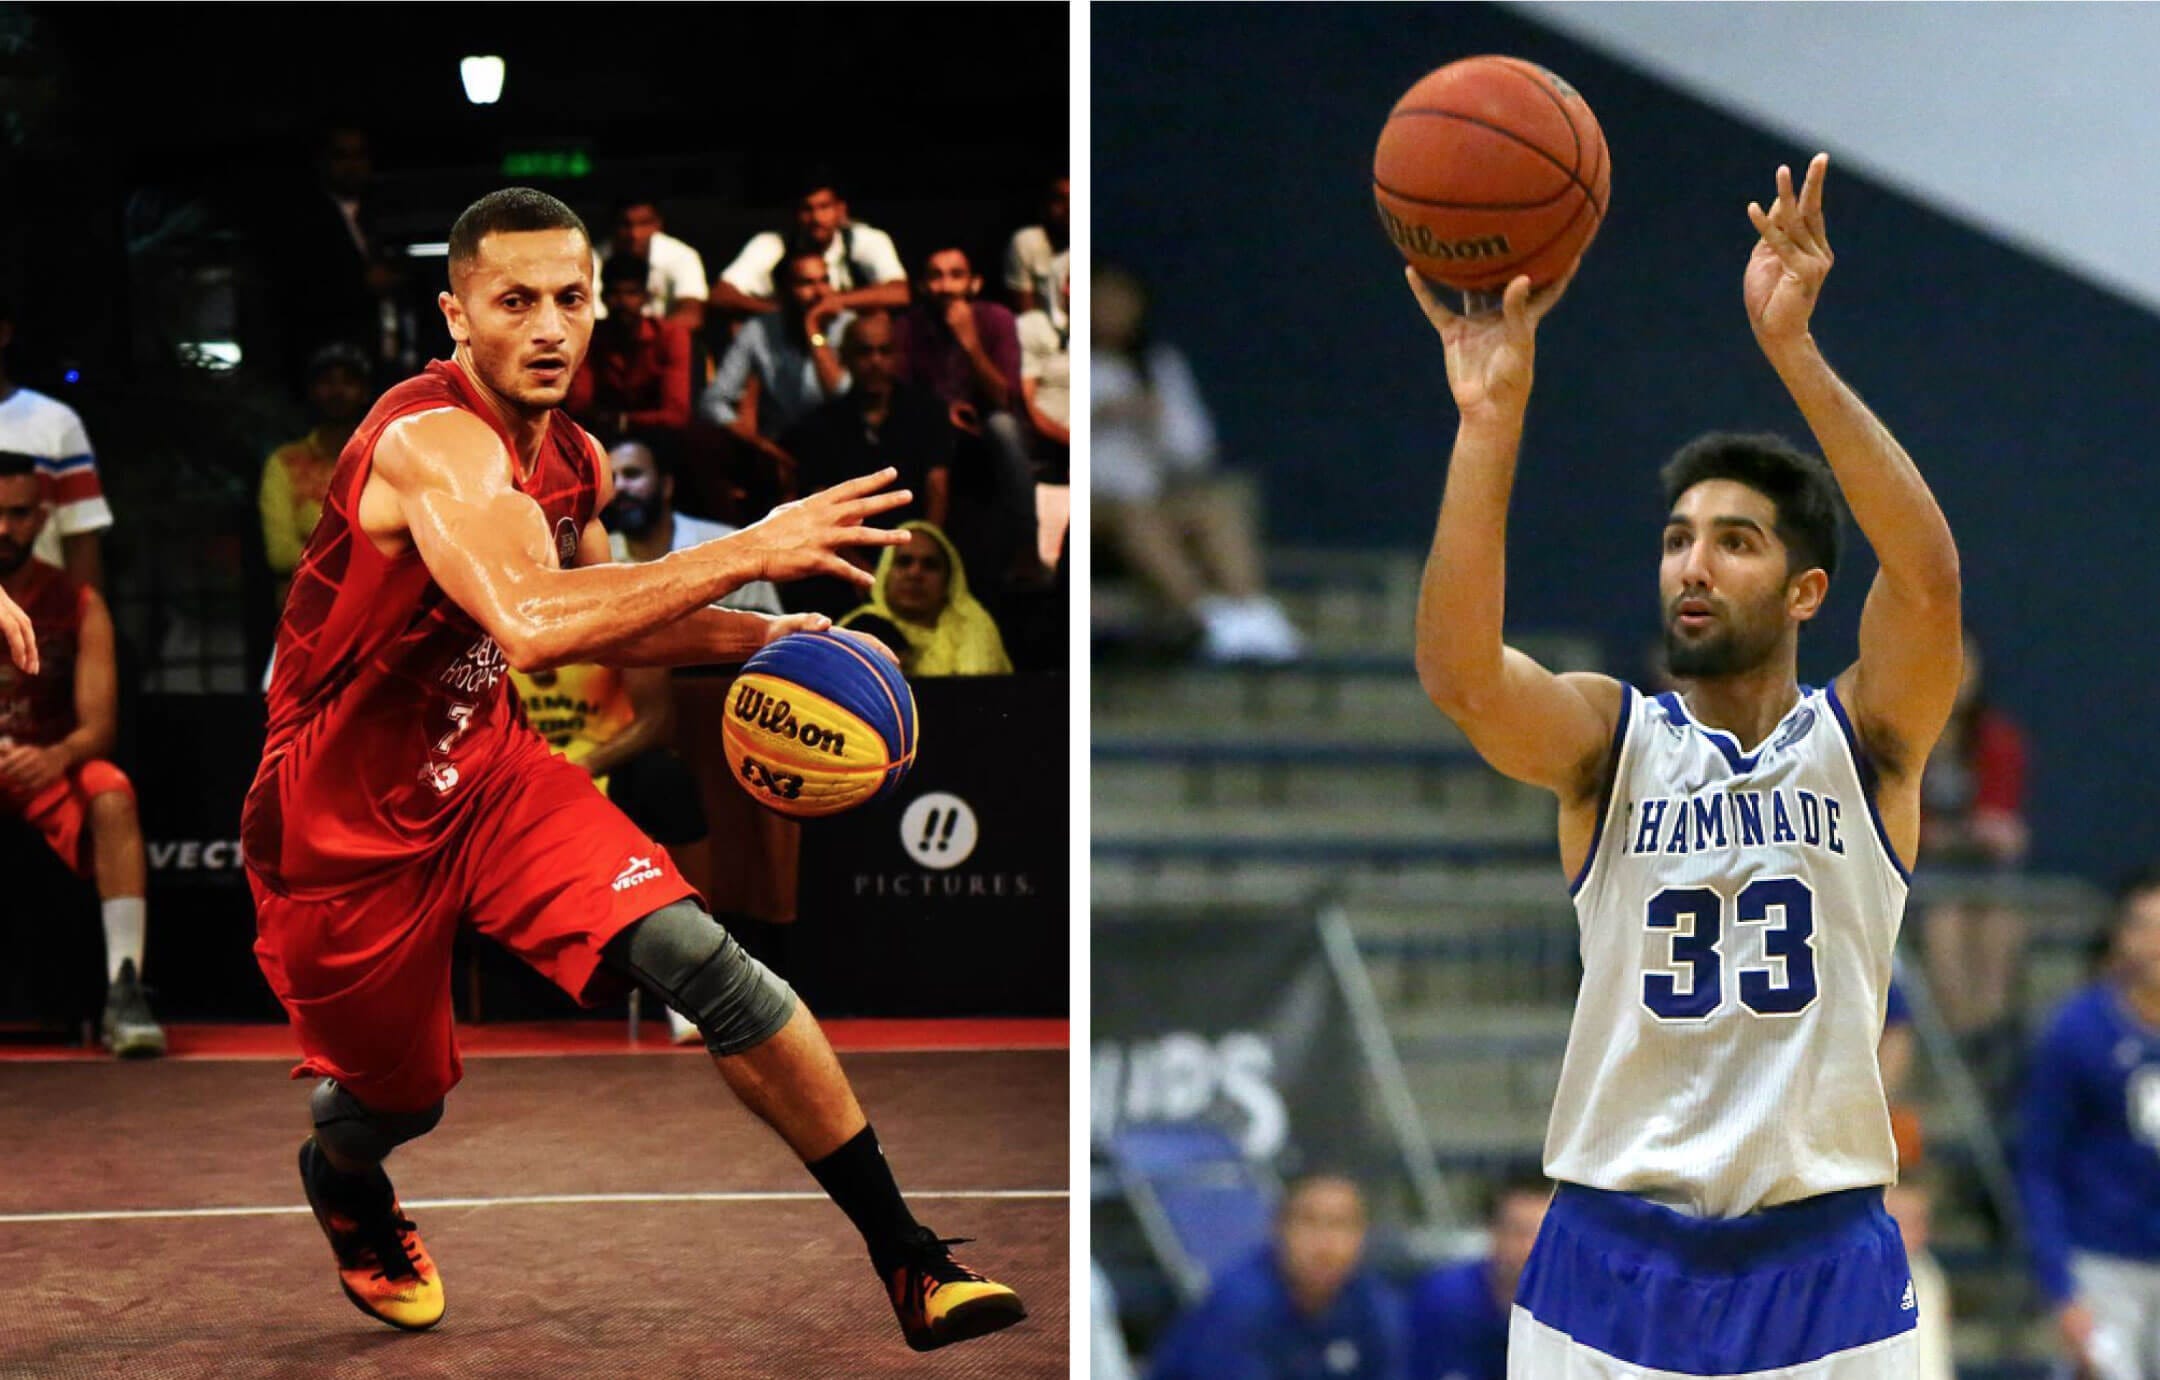 A vertically split image featuring basketball player Inderbir Gill, who is dribbling a ball, and Kiran Shastri, who is taking a shot.